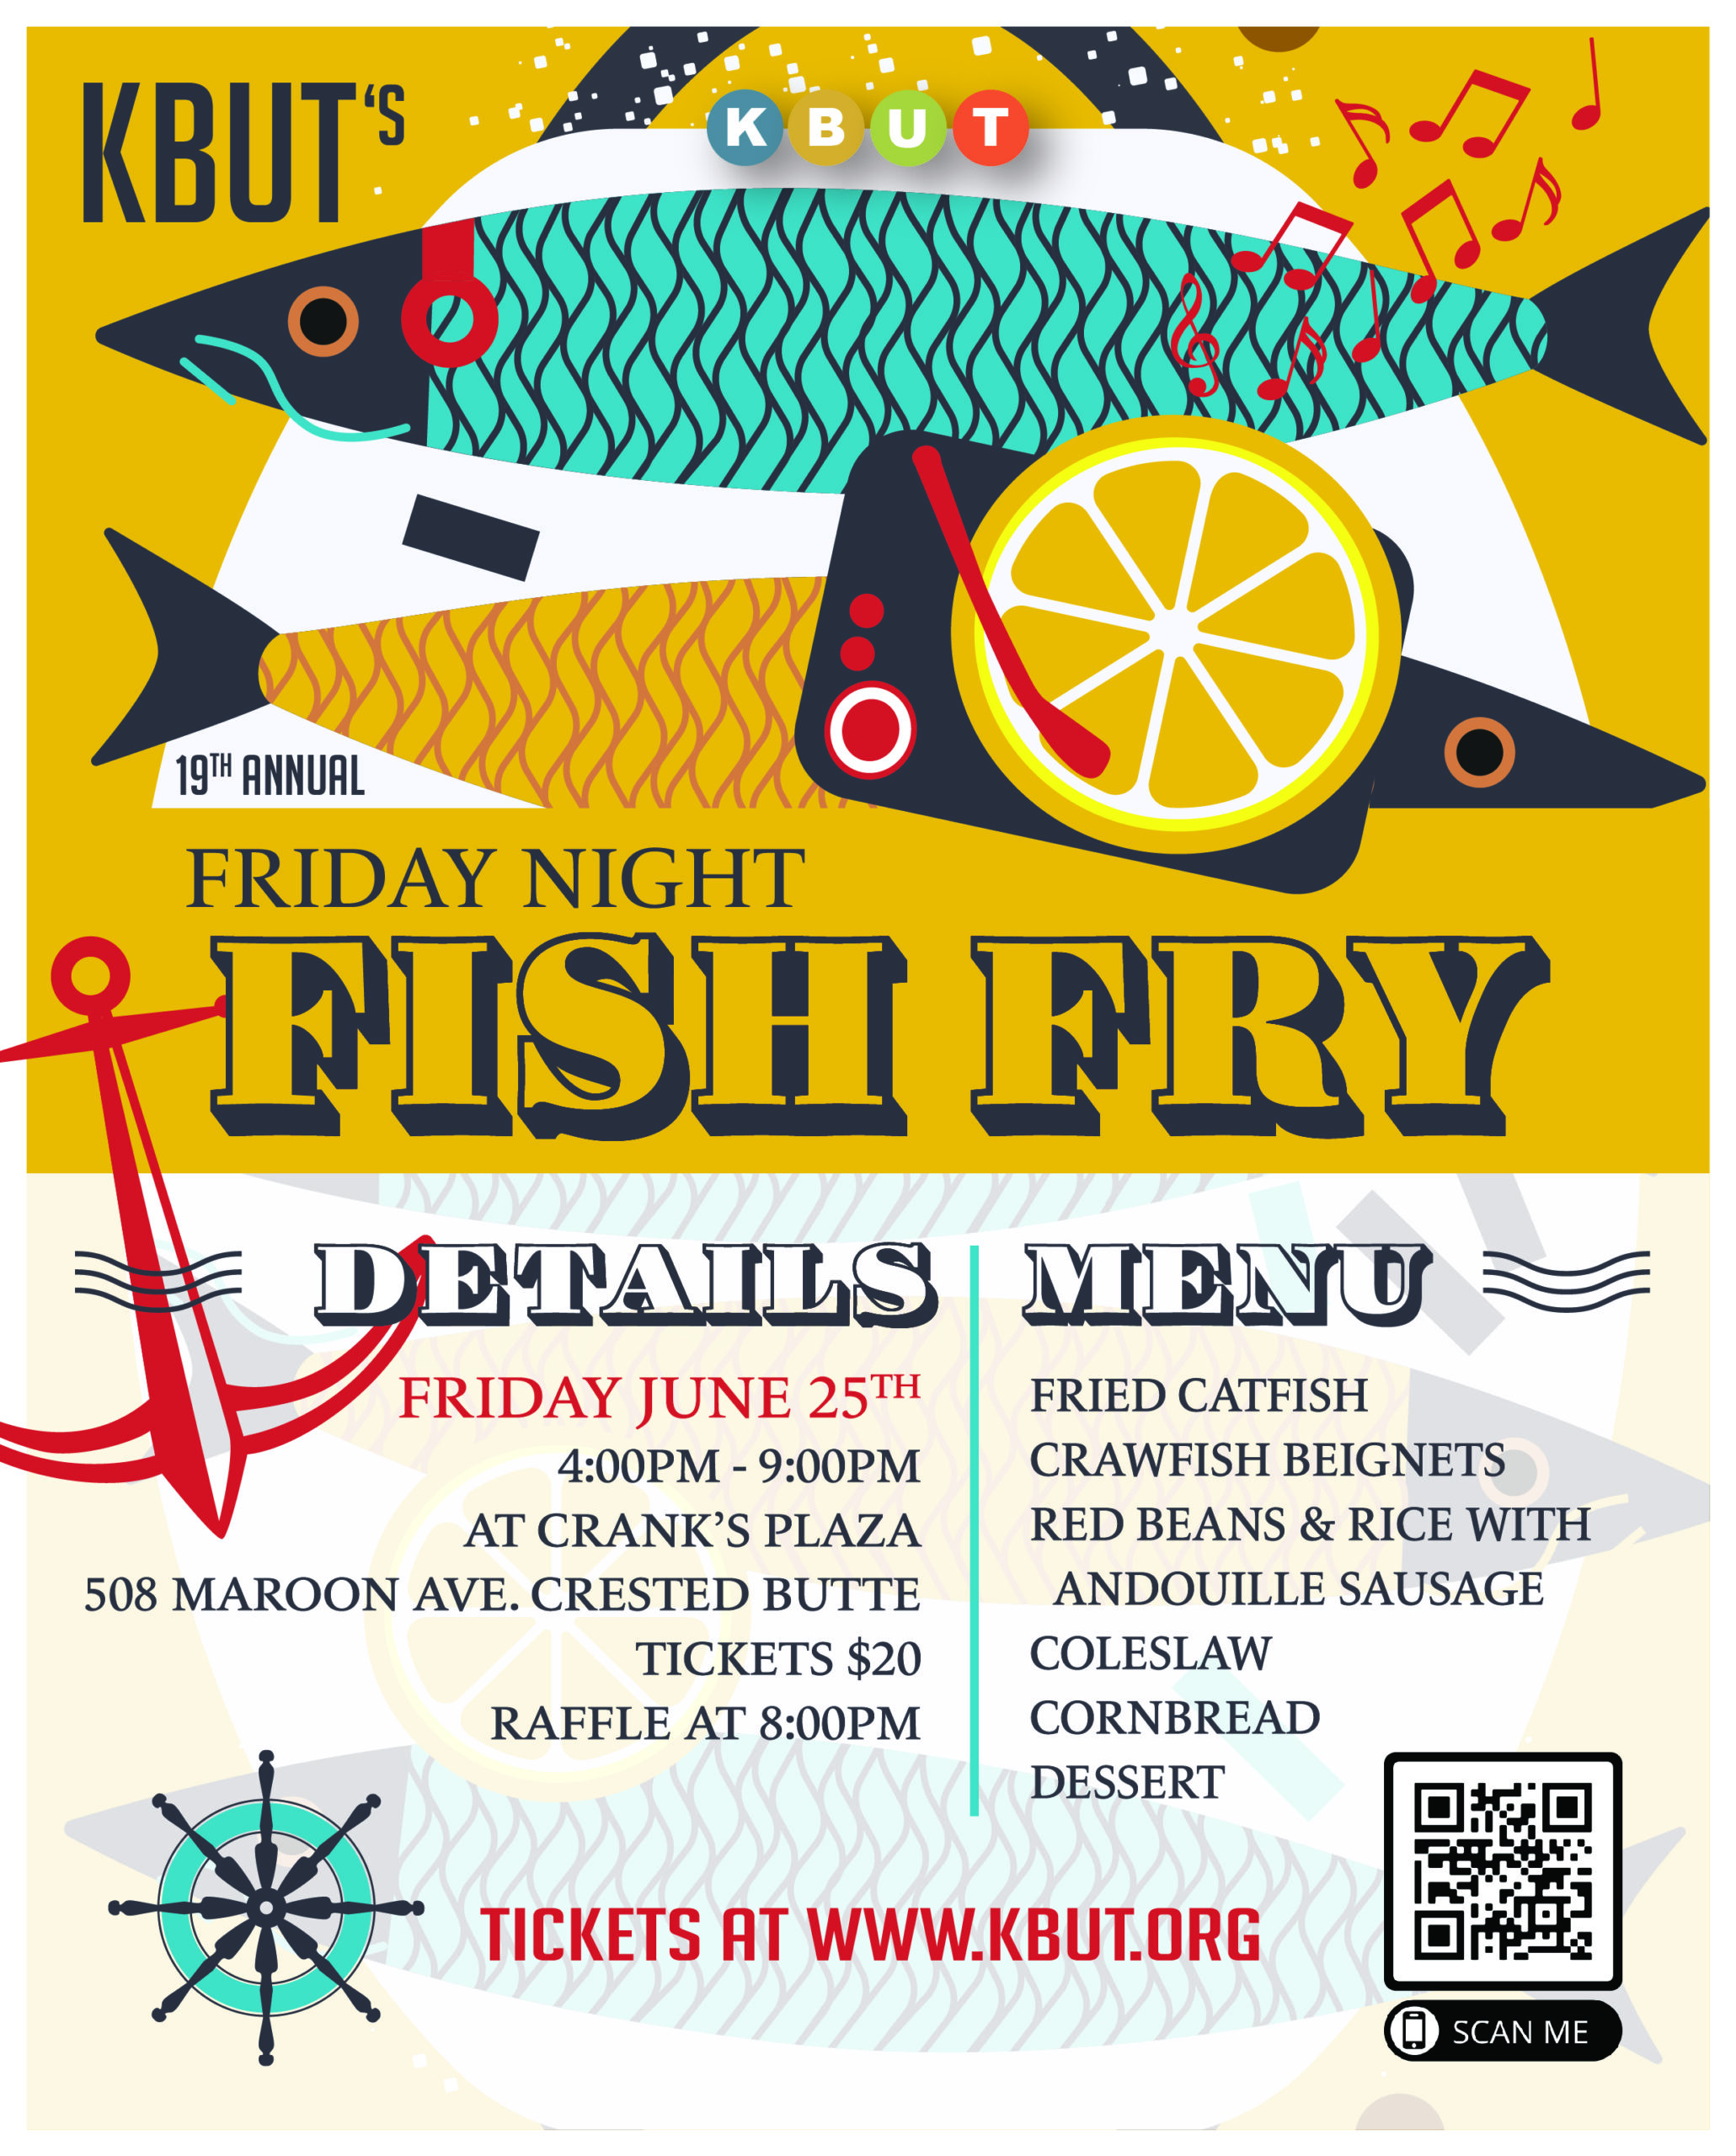 best-fish-fry-events-in-dayton-ohio-this-weekend-dayton-fish-fries